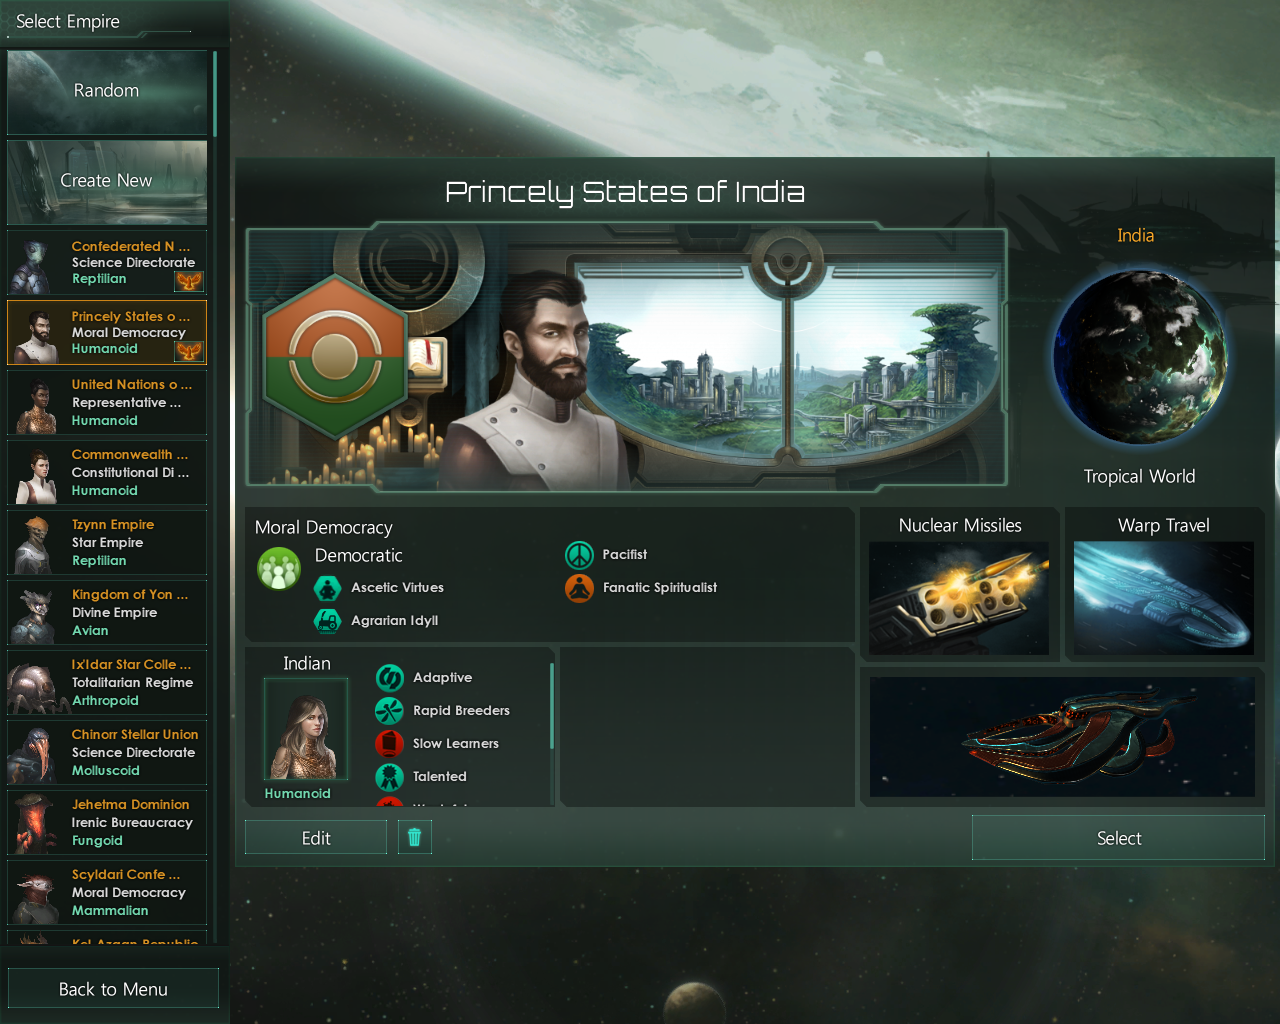 Image 2 - Unethical slavery updated mod for Stellaris.